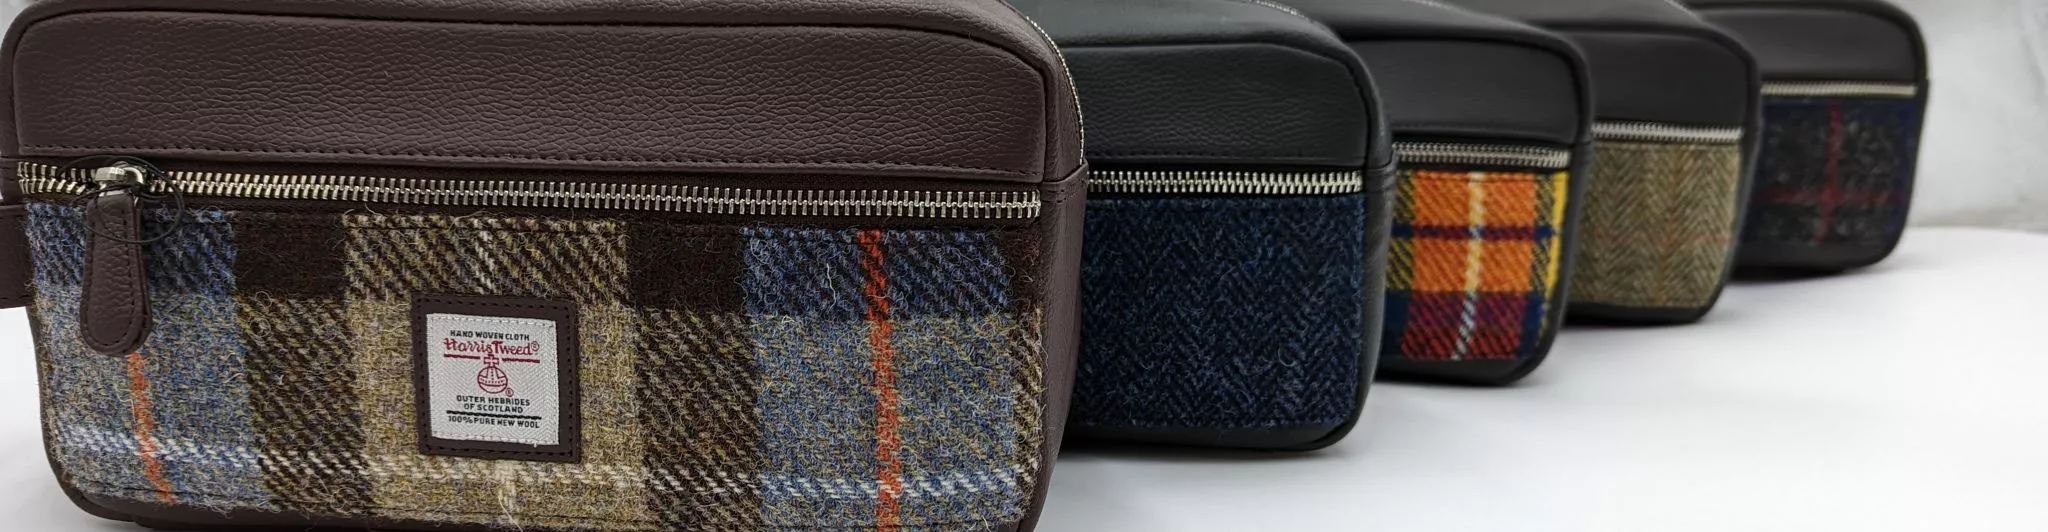 Fathers Day gifts, Harris Tweed was bags in five colours